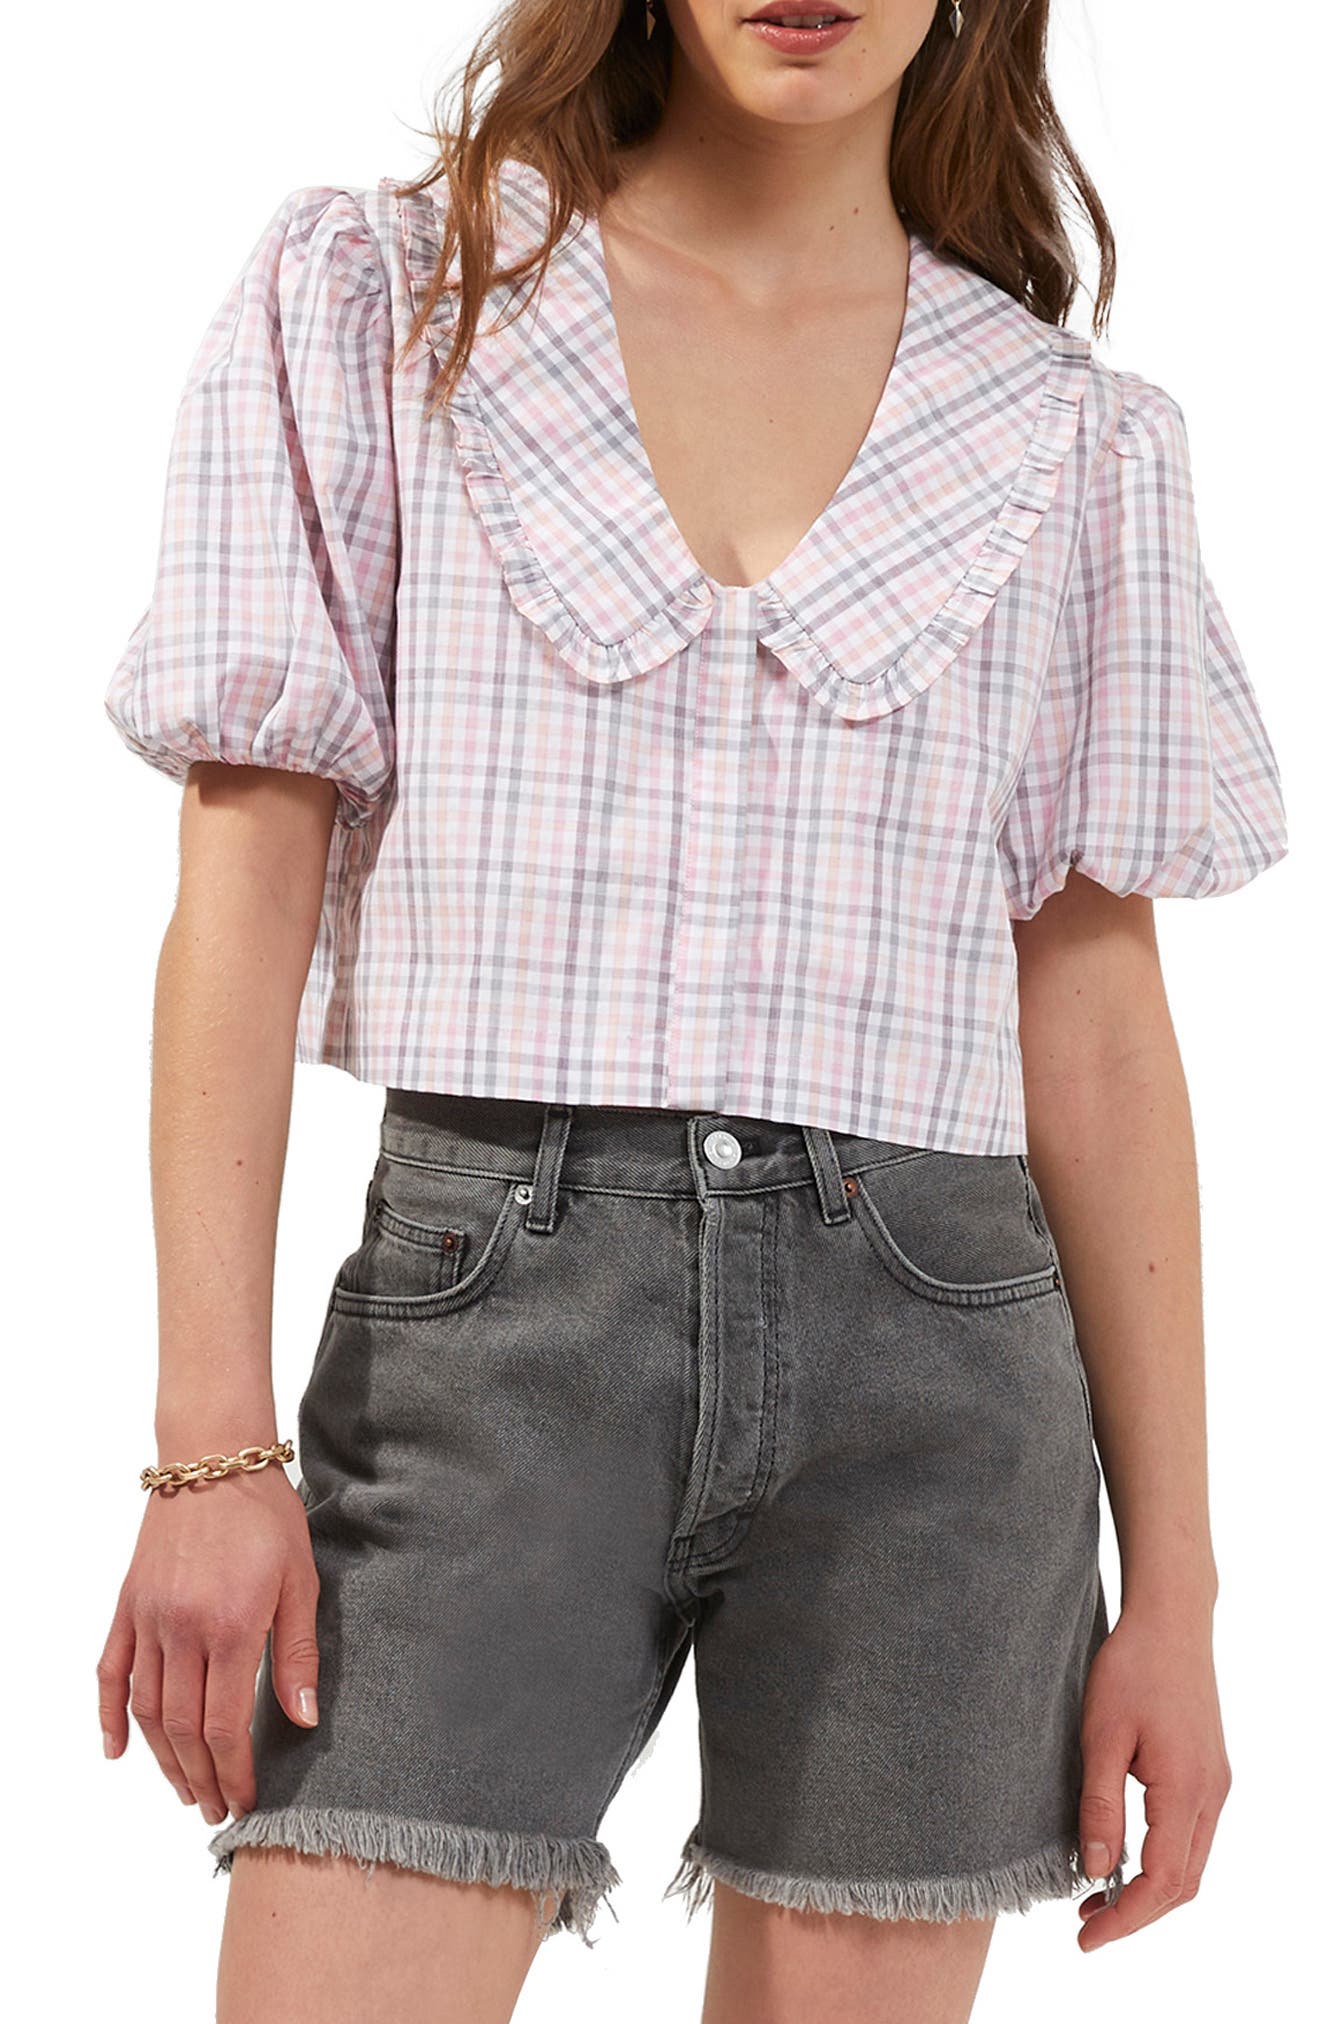 French Connection Womens Hennessy Cotton Button Down Top